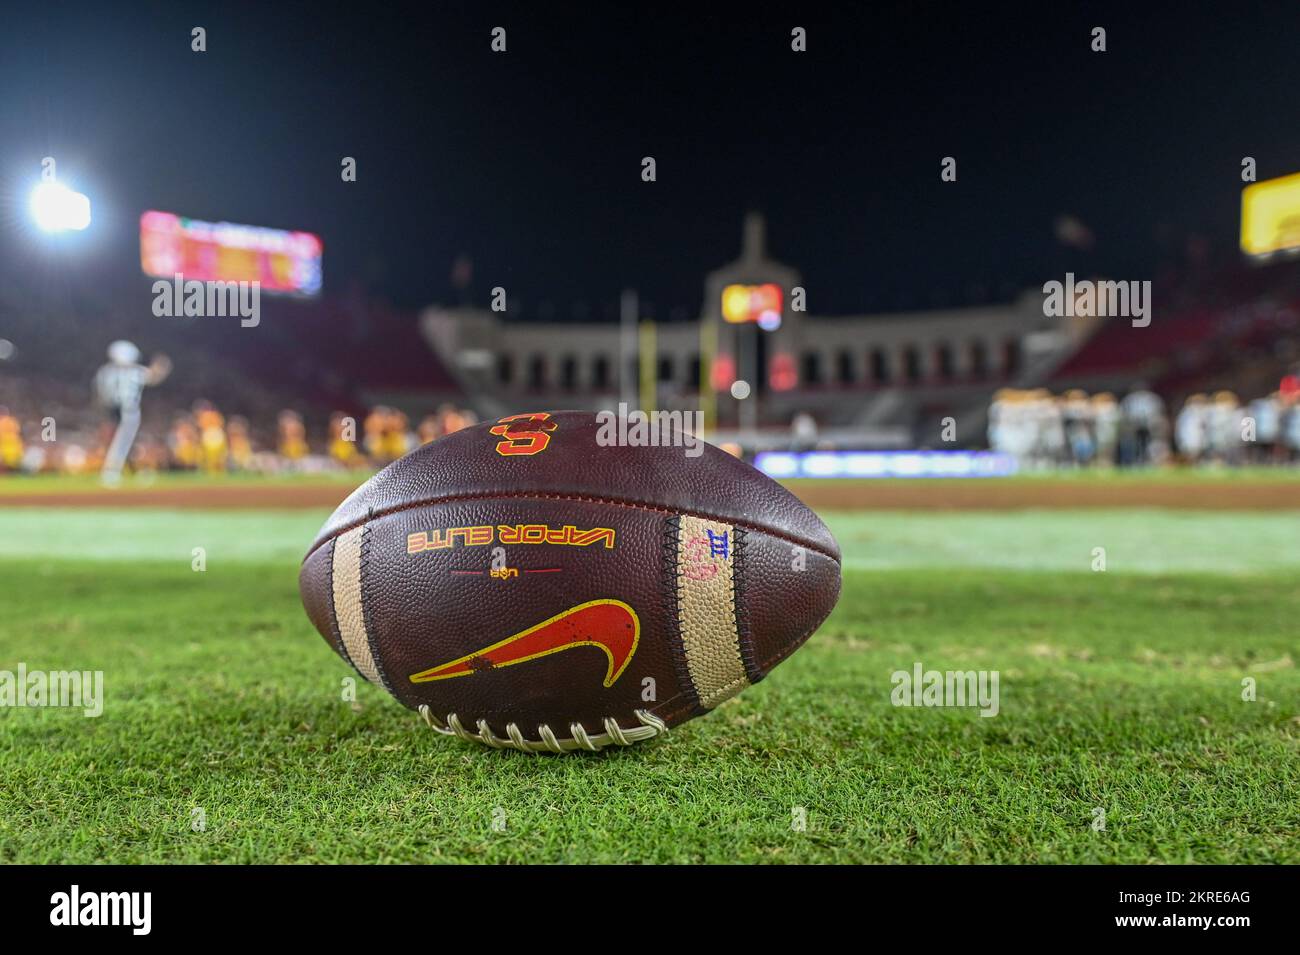 Detailed view of a Nike Vapor Elite football during an NCAA football game between the Southern California Trojans and the Arizona State Sun Devils, Sa Stock Photo